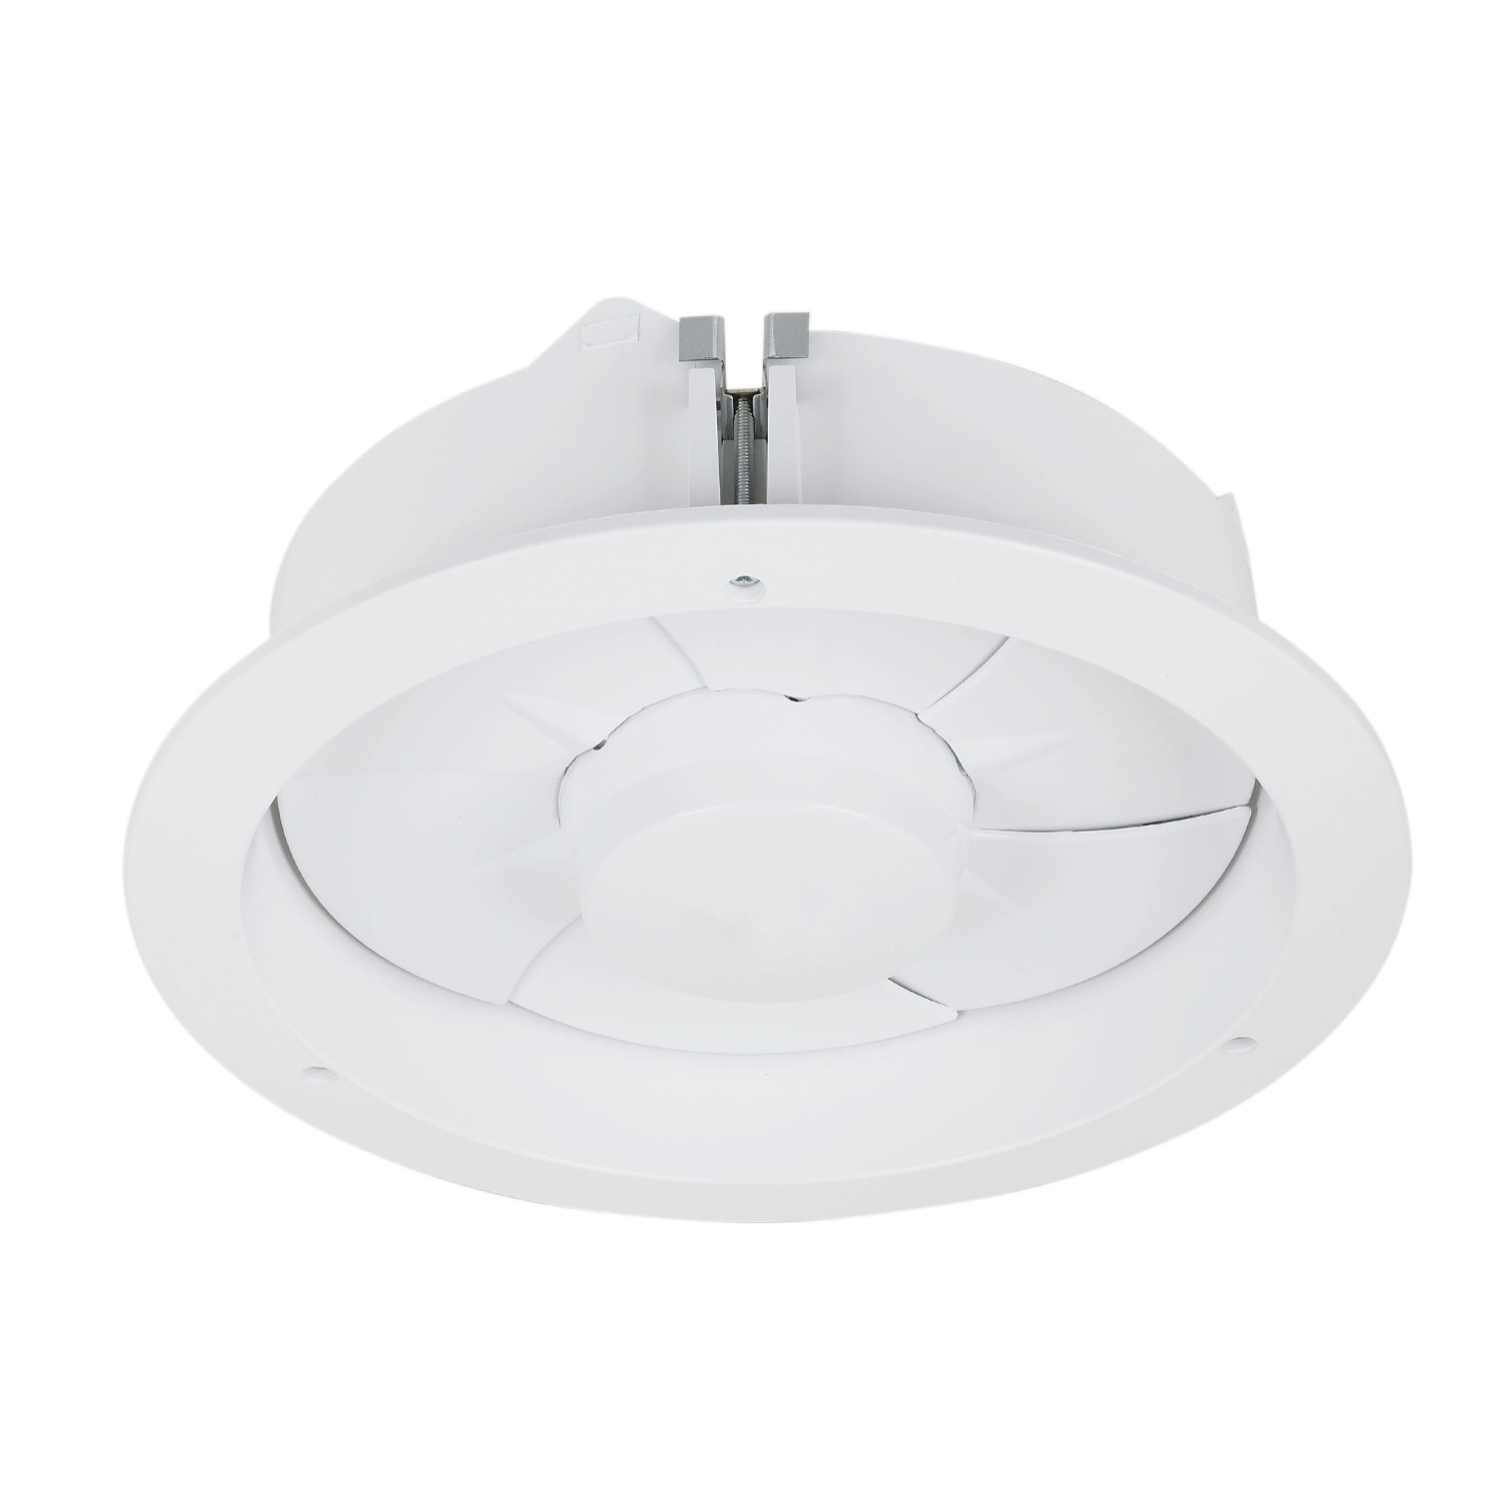 Clipsal Mistral Expressaire Ceiling Mounted Exhaust Fan 250mm 800m3 Hr - 6220-0